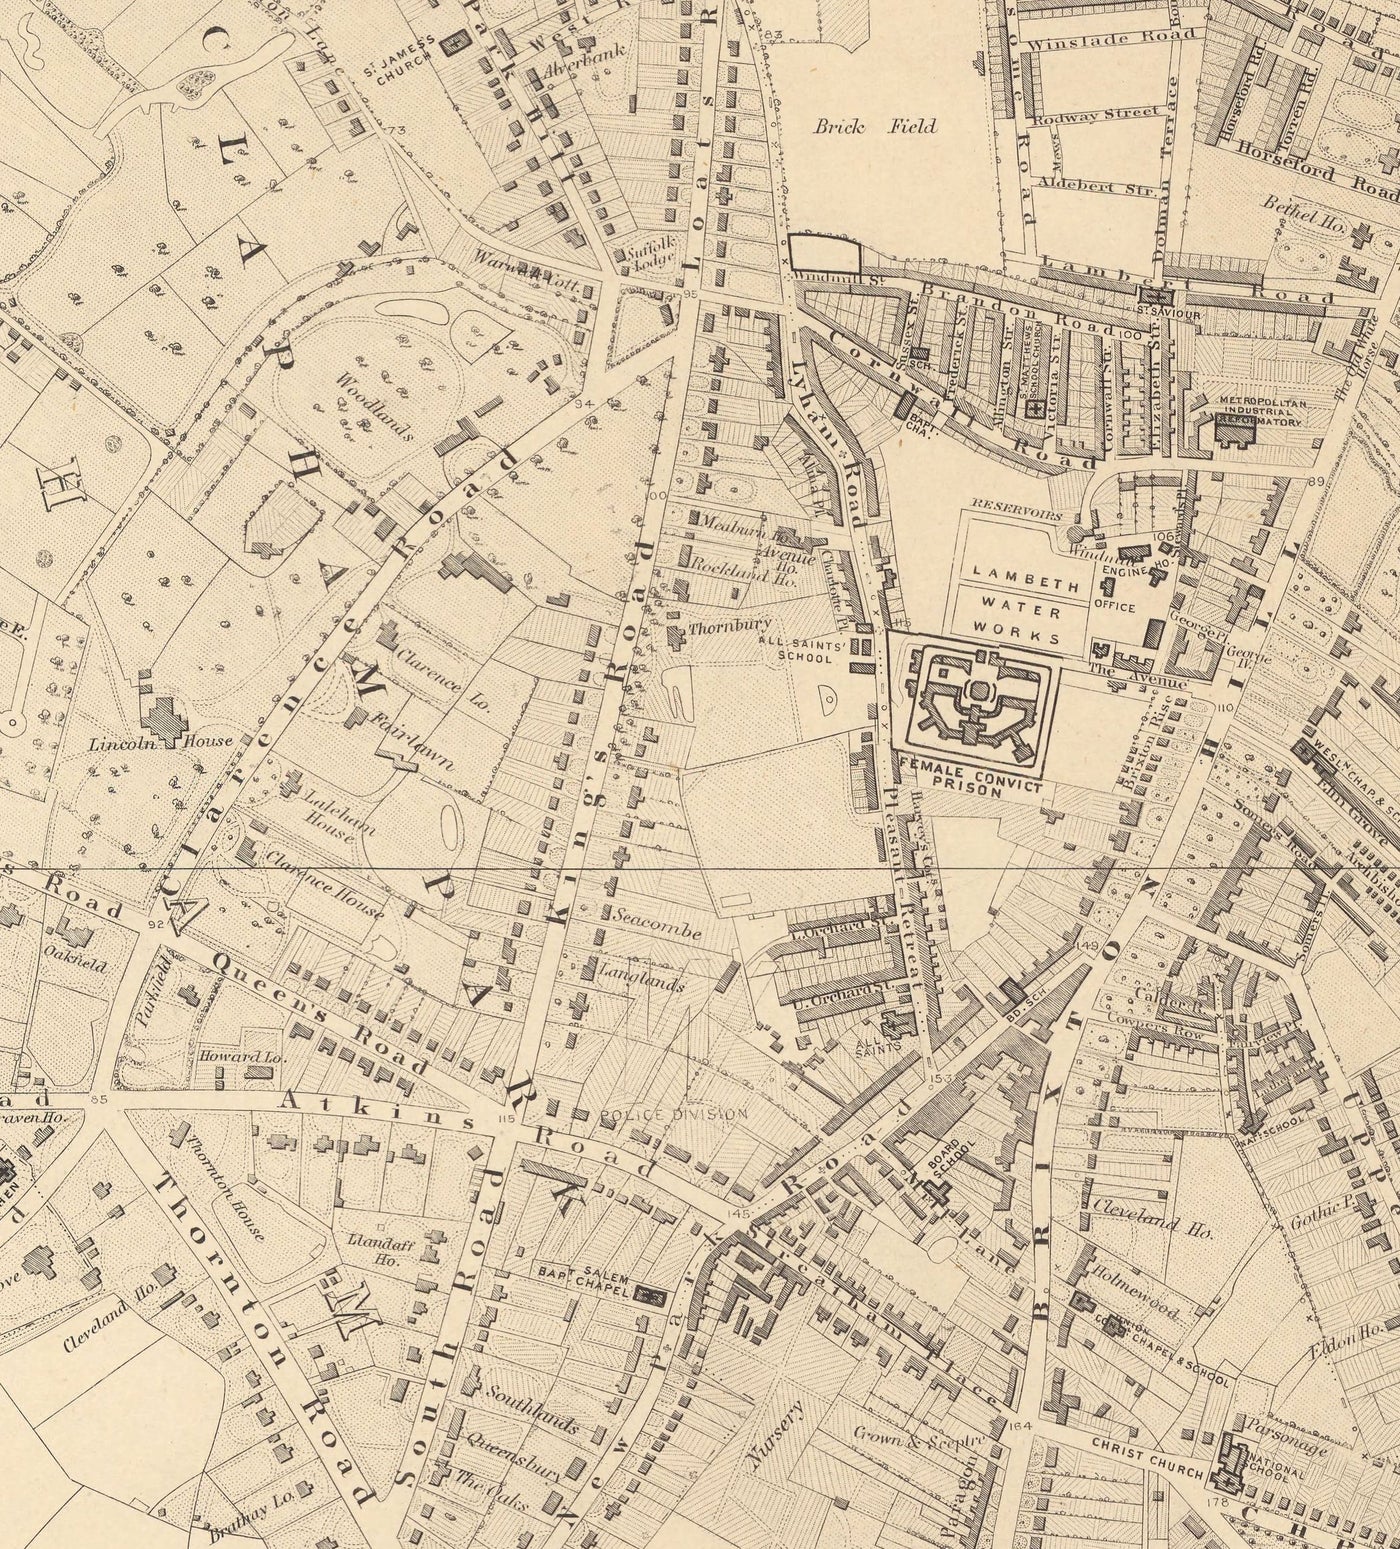 Old Map of South London in 1862 by Edward Stanford - Clapham, Balham, Brixton, Tooting - SW2, SW4, SW12, SW17, SW11